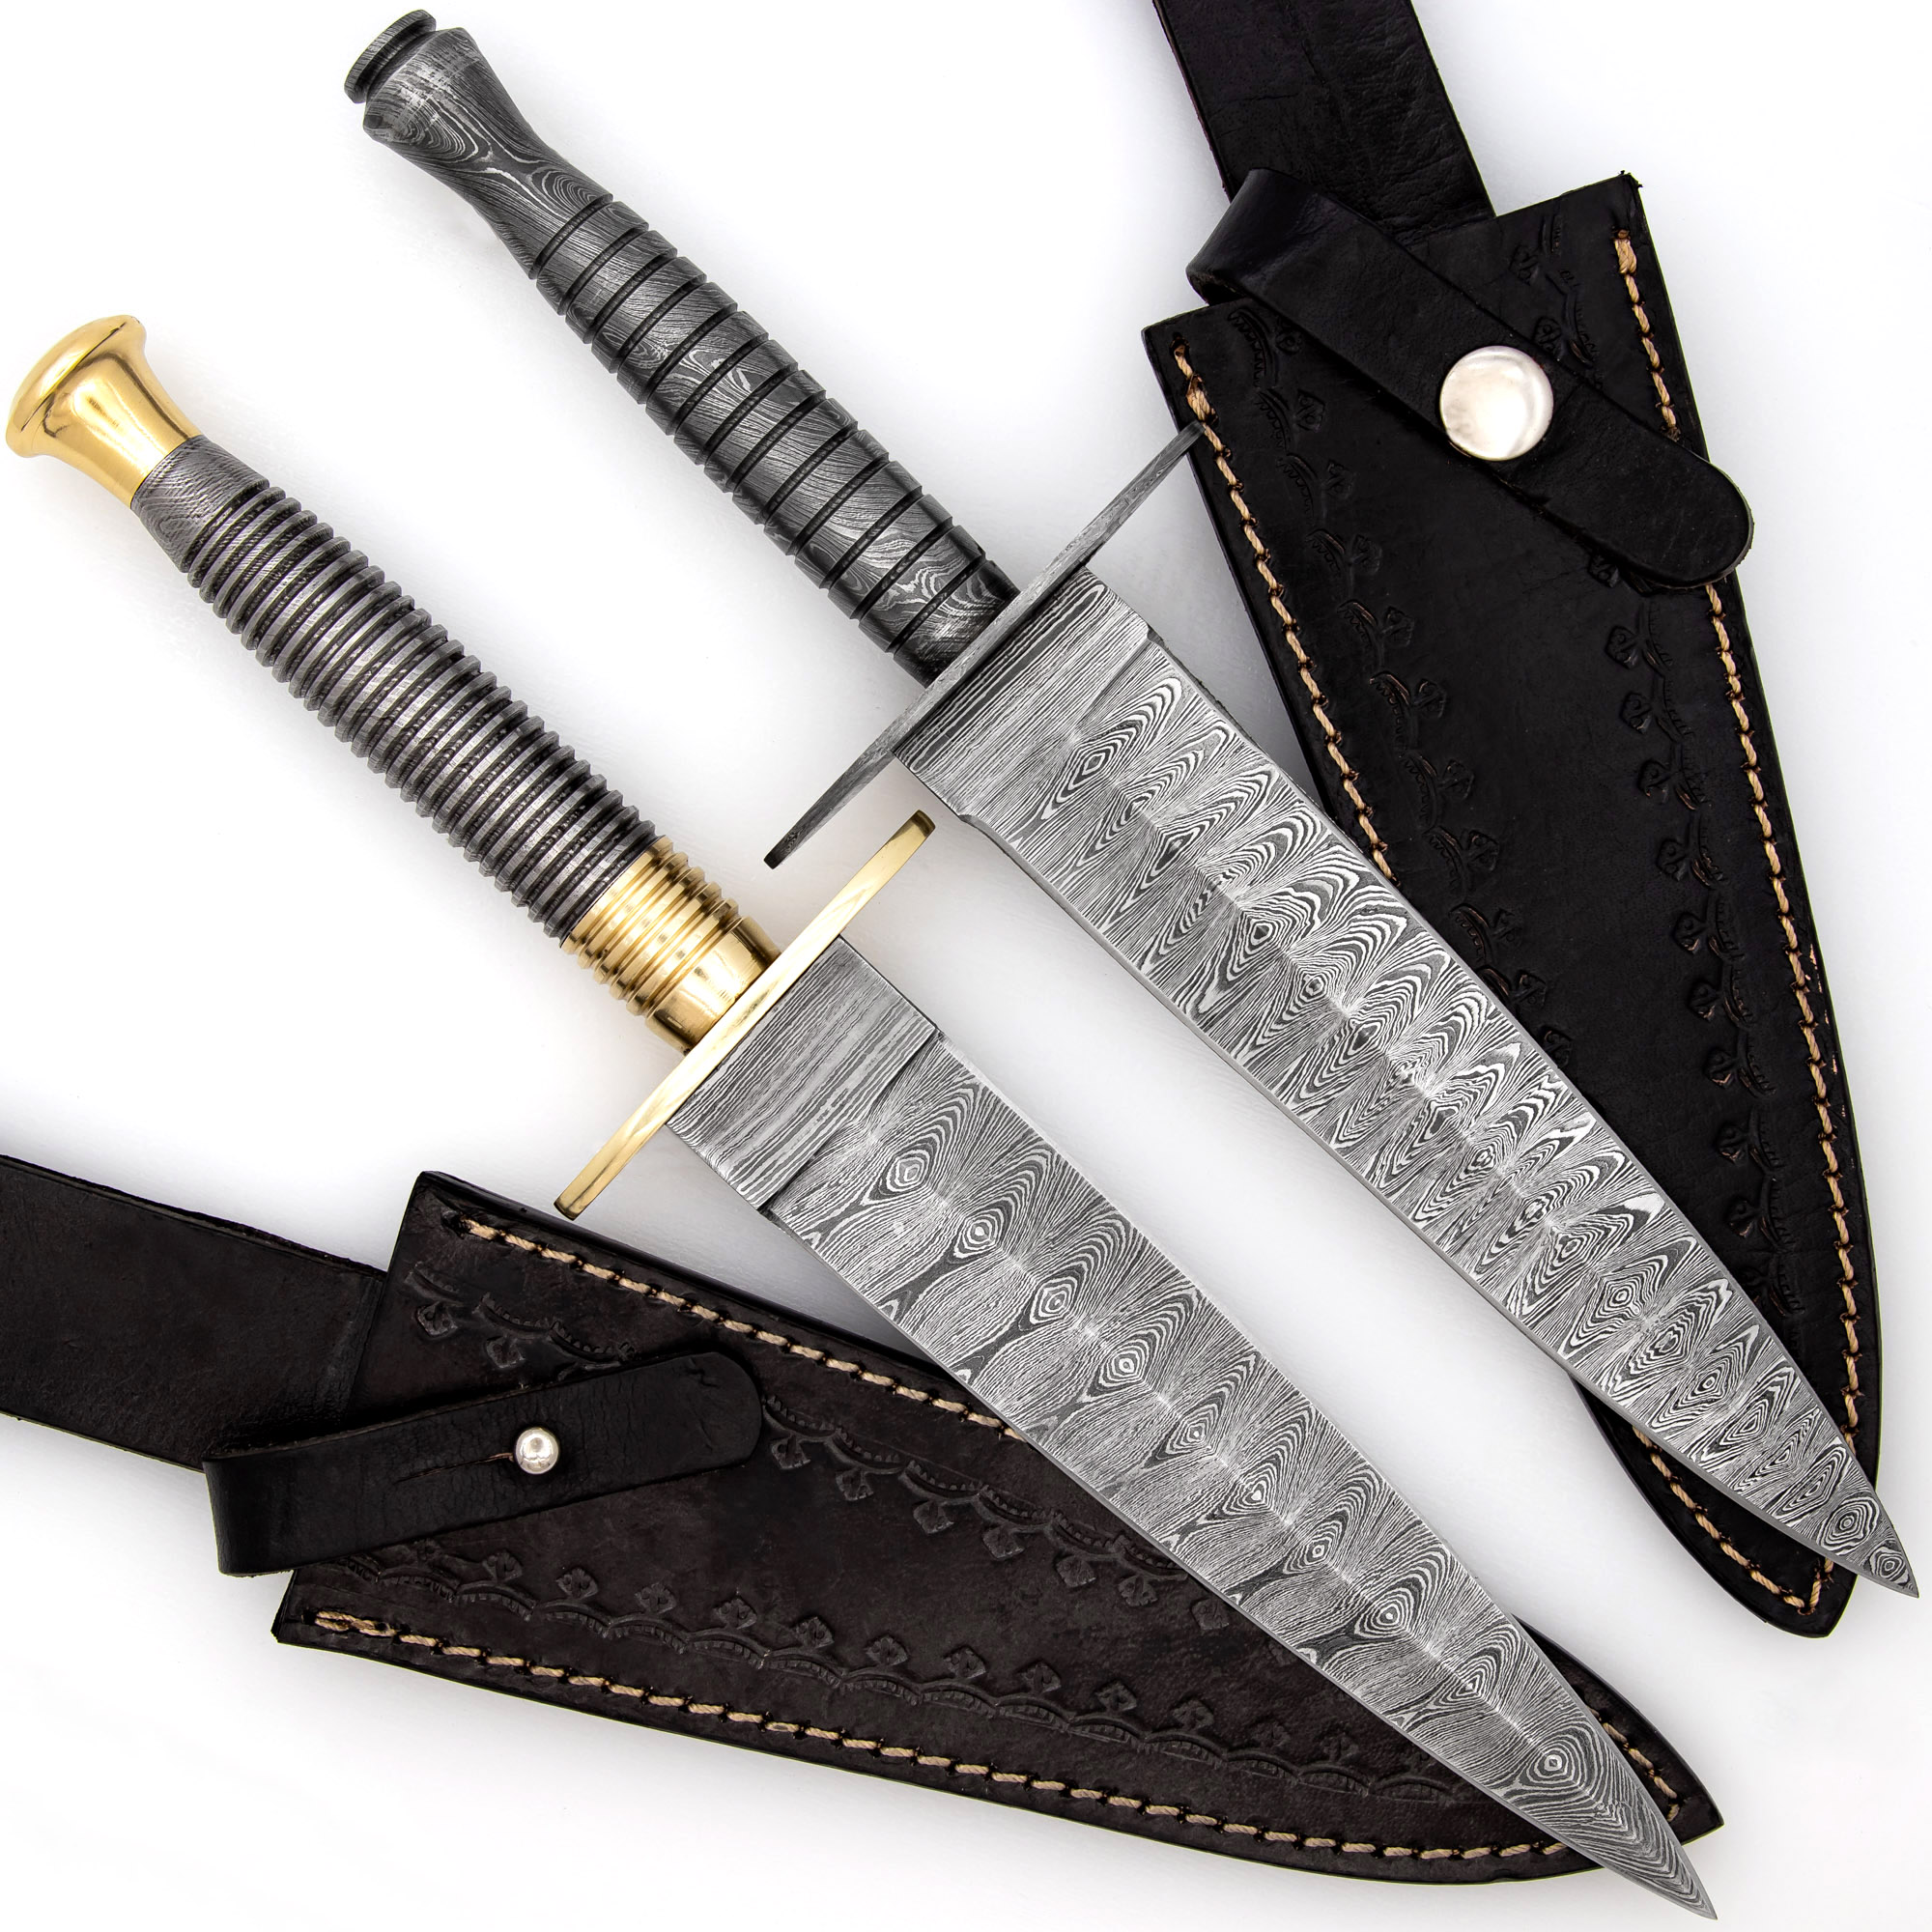 Full Damascus Steel Commando Knife | Pattern Welded Steel Full Tang Replica JSOC DAGGER with Leather